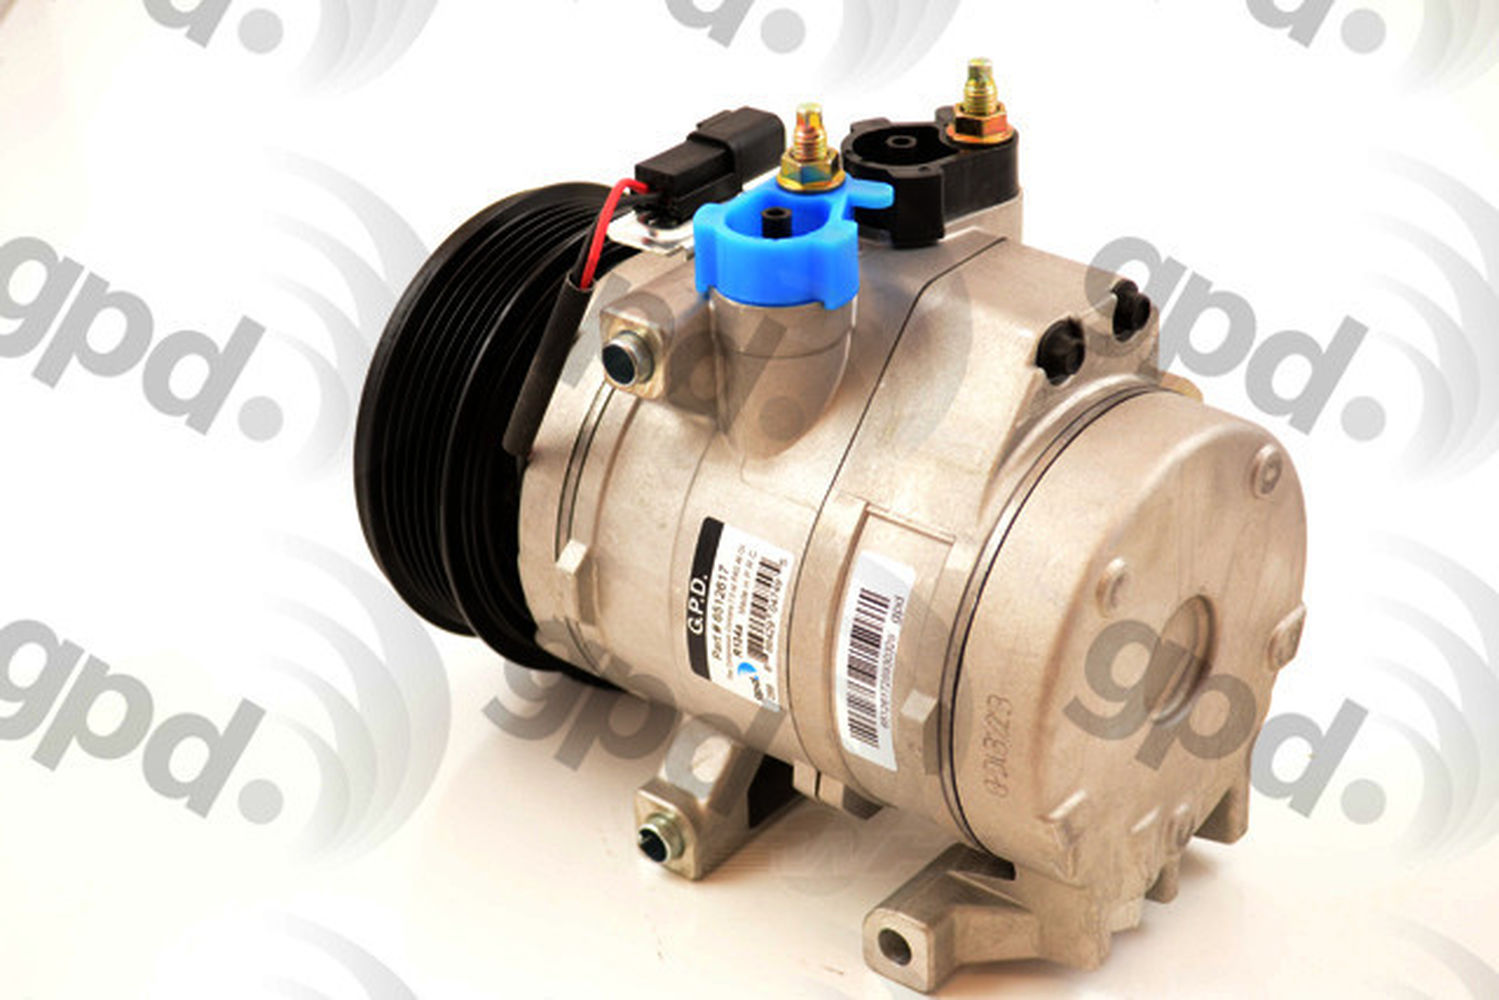 Global Parts Distributors 6512617 A/C Compressor With Clutch Fits select: 2006-2014 FORD F150, 2008-2010 FORD F250 - image 1 of 2